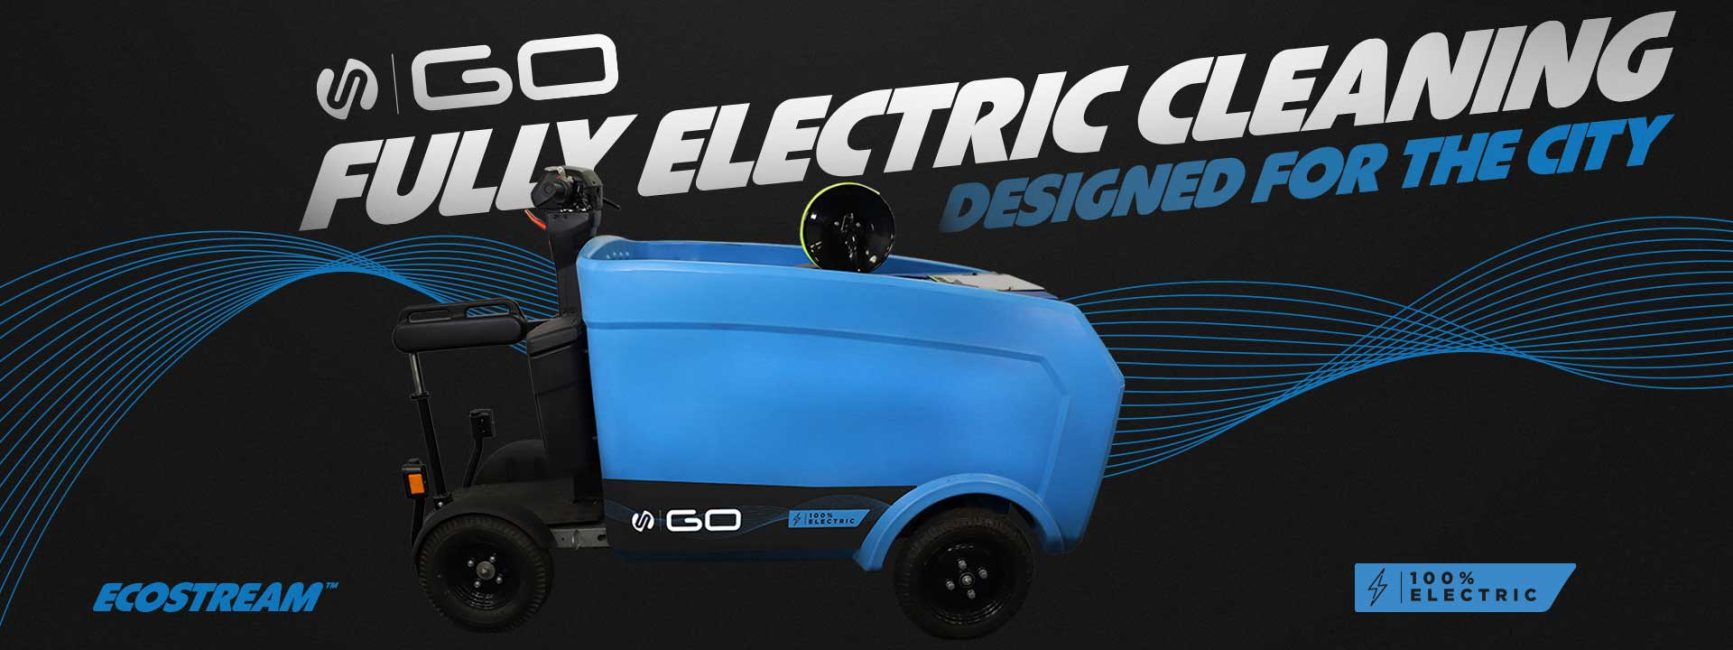 streamline go electric cleaning vehicle